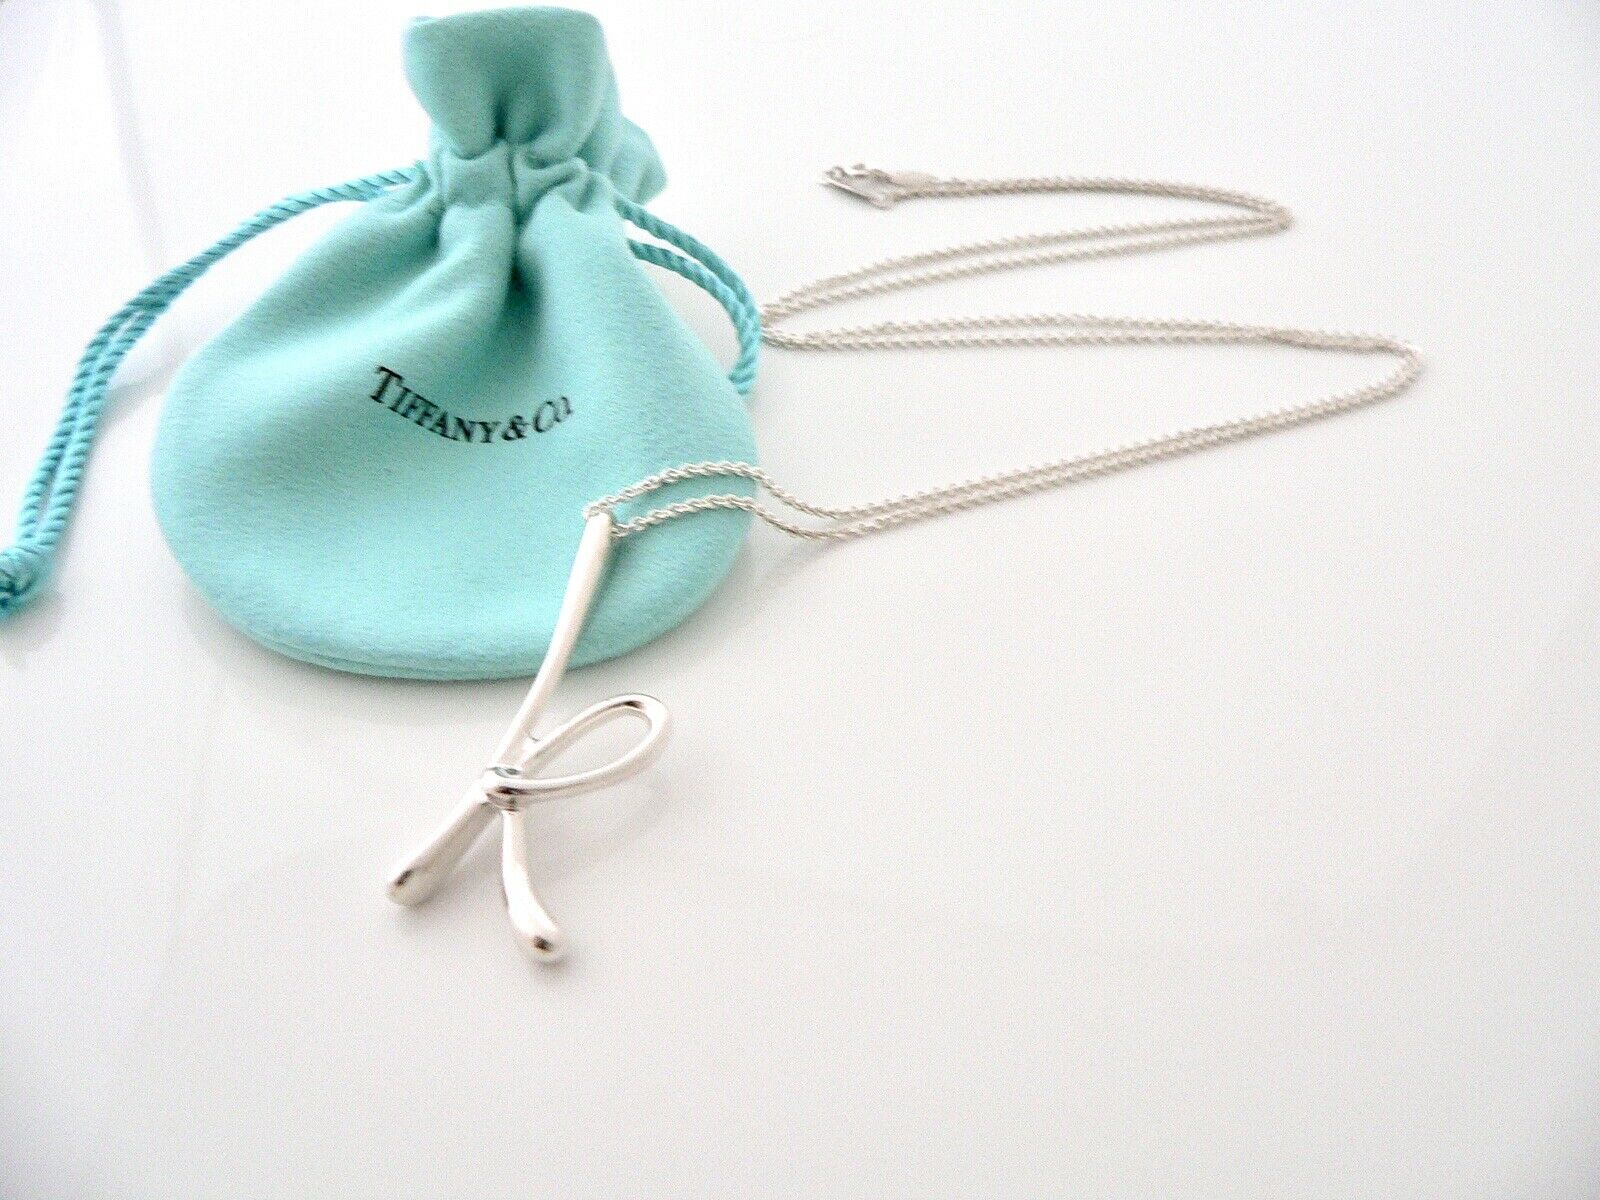 Tiffany & Co. Heart Tag Charm Necklace with B Engraved | eBay